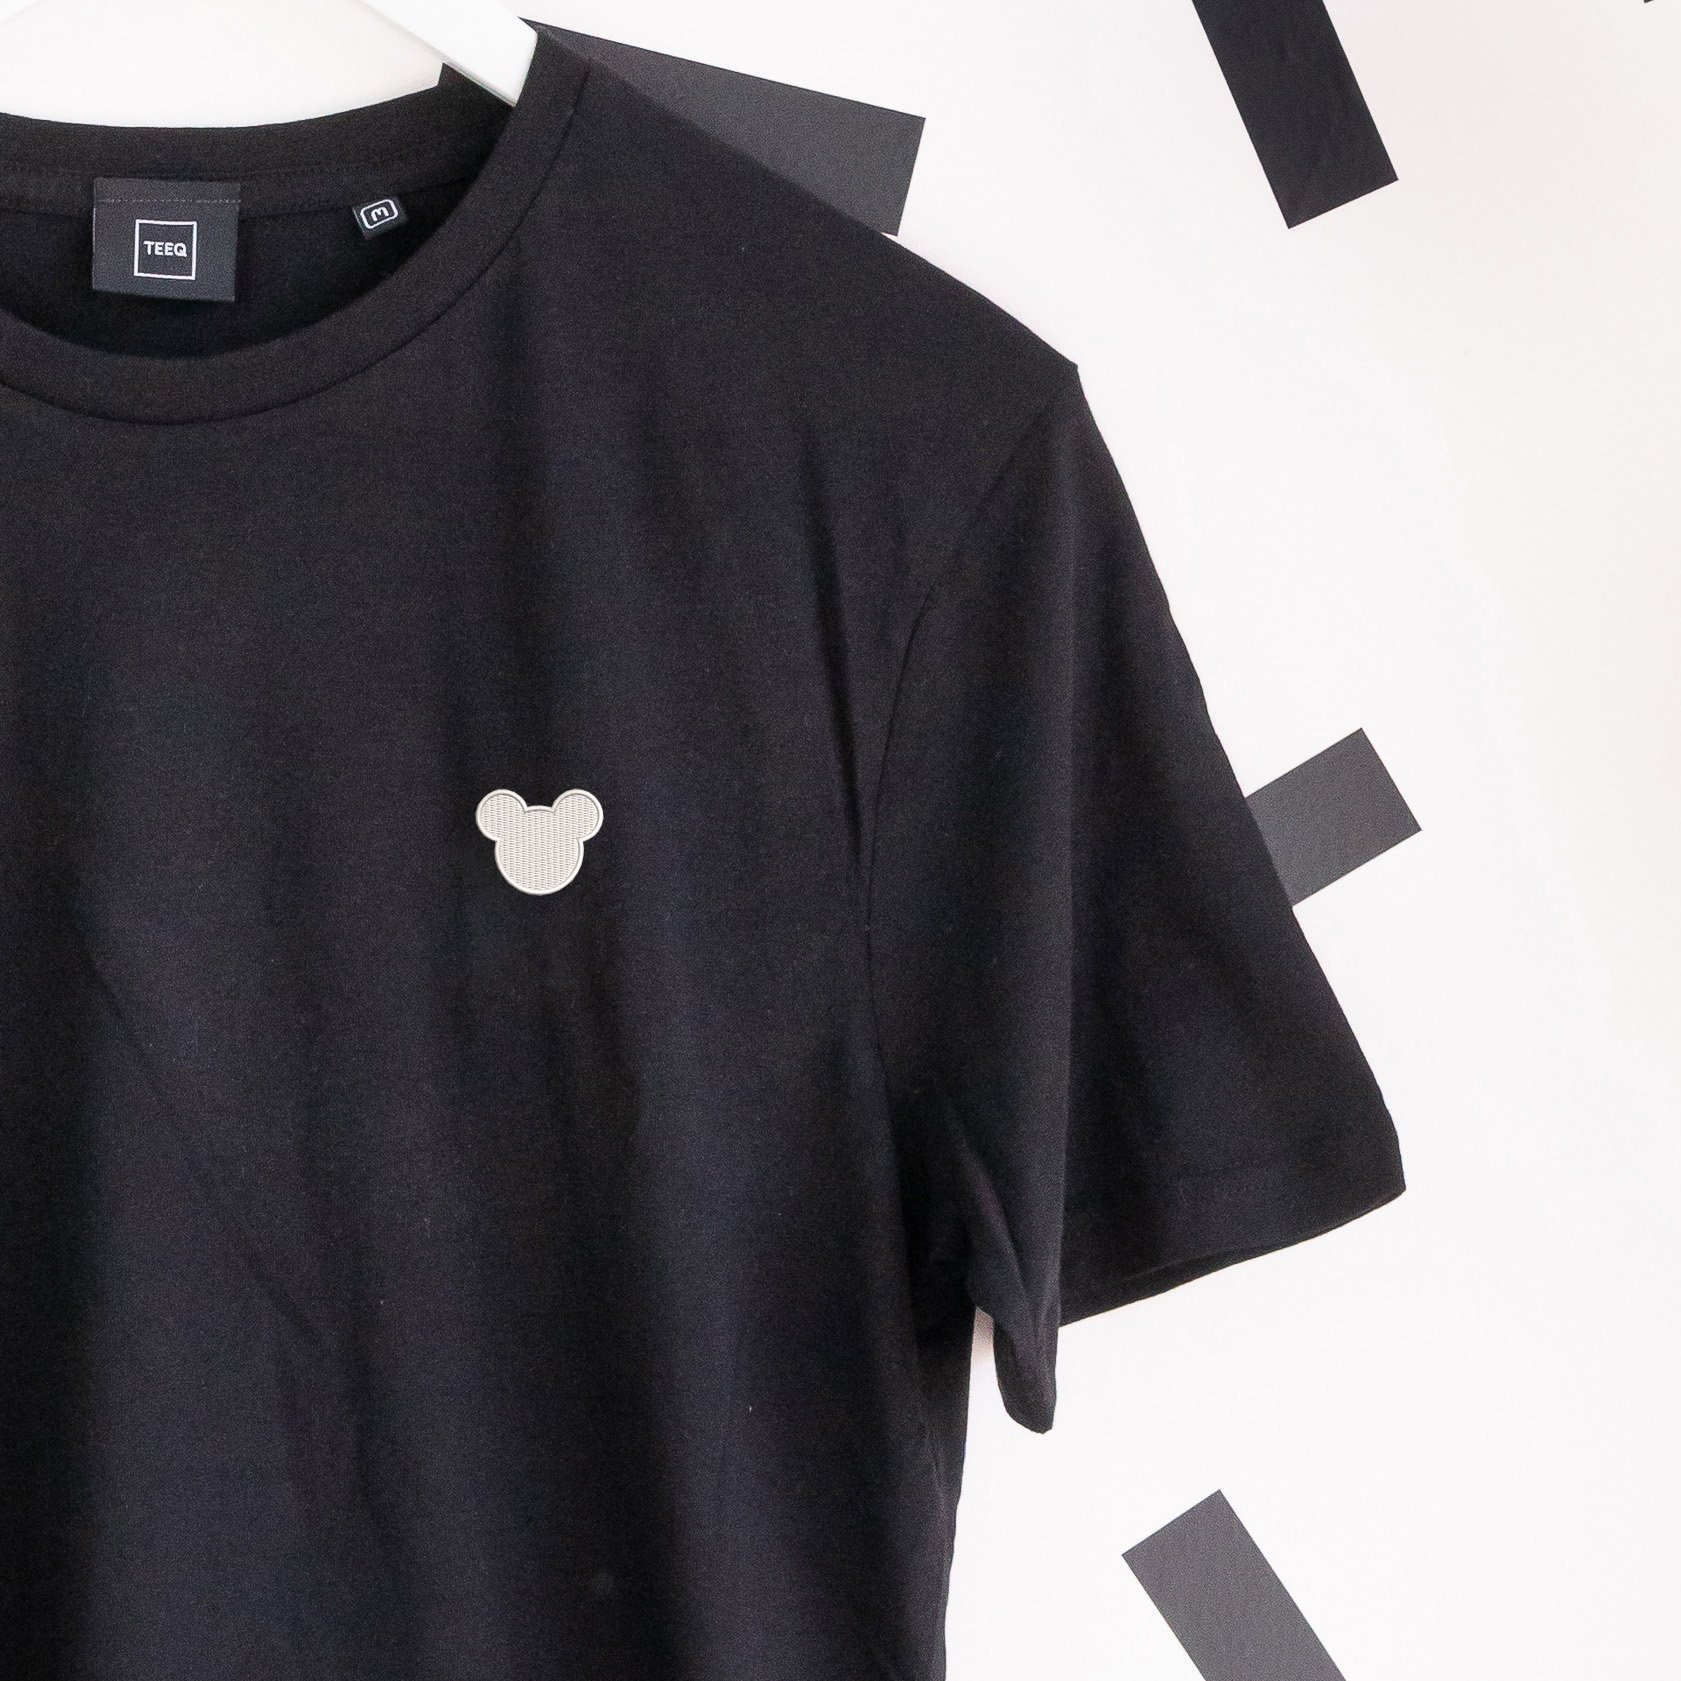 NEW IN, NEW IN! 🖤🤍

Introducing our Minimal Mickey T-shirt, a stylish and affordable addition to our collection! This black tee features a simple yet iconic Mickey Mouse embroidery in white thread, making it a perfect choice for anyone who loves th